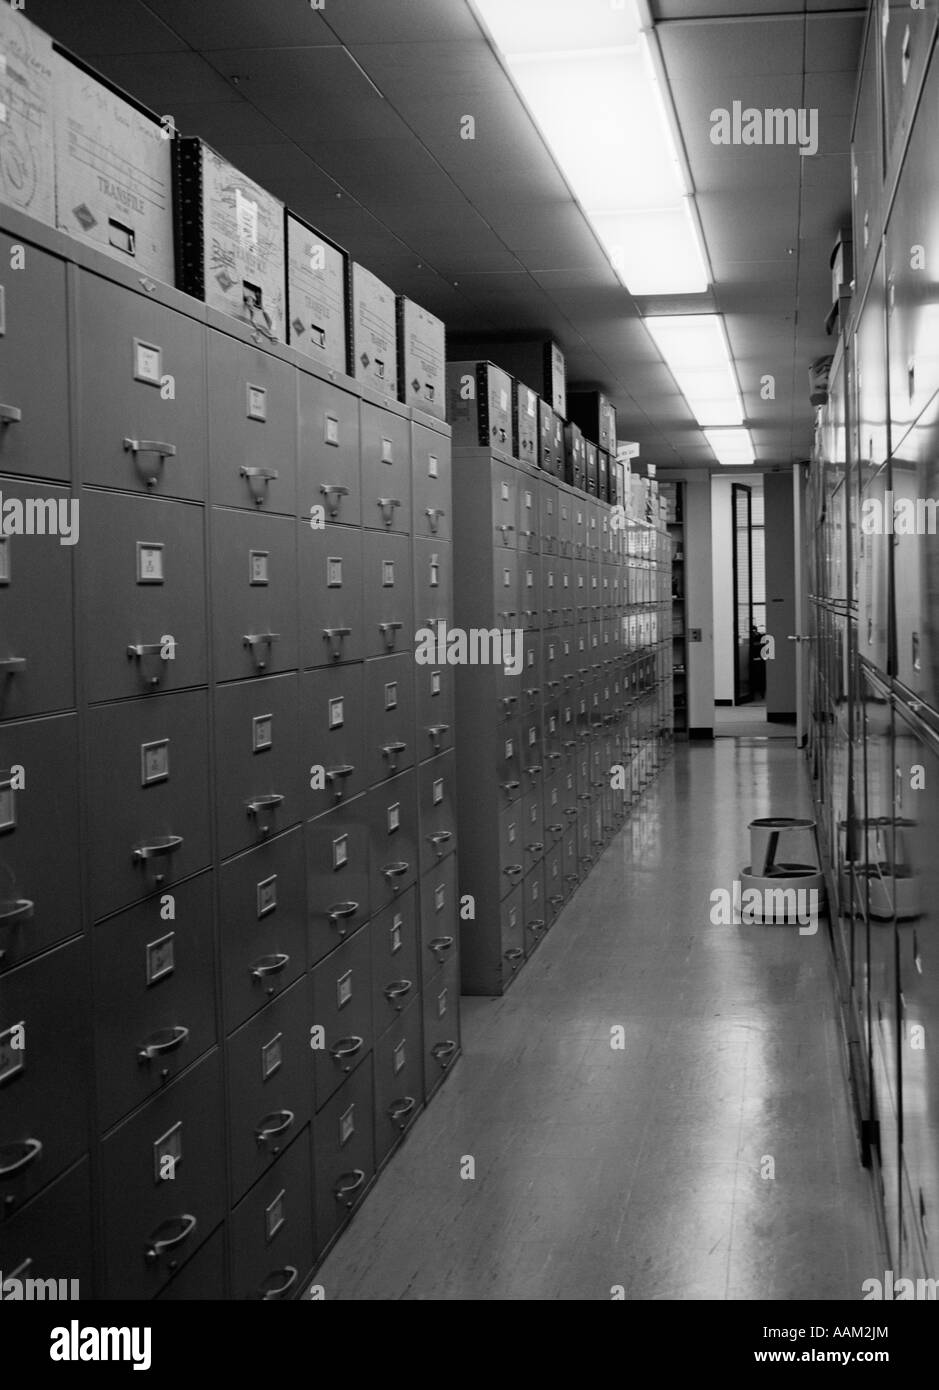 1970s OFFICE INTERIOR CORRIDOR LINED WITH METAL FILE CABINETS BOXES STORAGE STEP STOOL Stock Photo